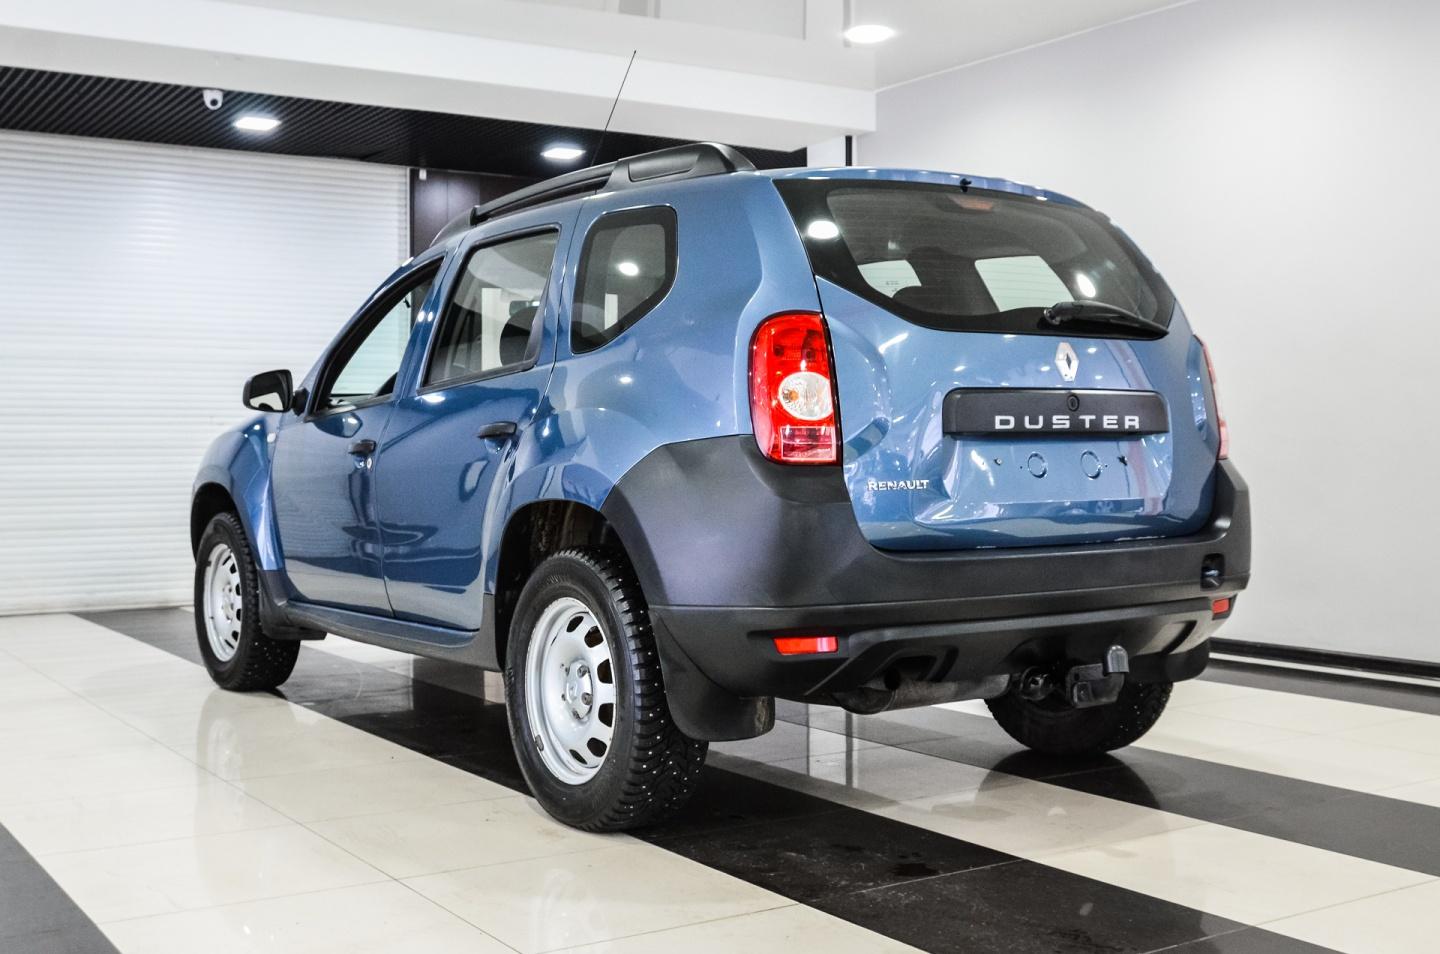 Renault Duster 2013. Рено Дастер 2024. Renault Duster 6001548891 новый. Рено Дастер 2024 купить.